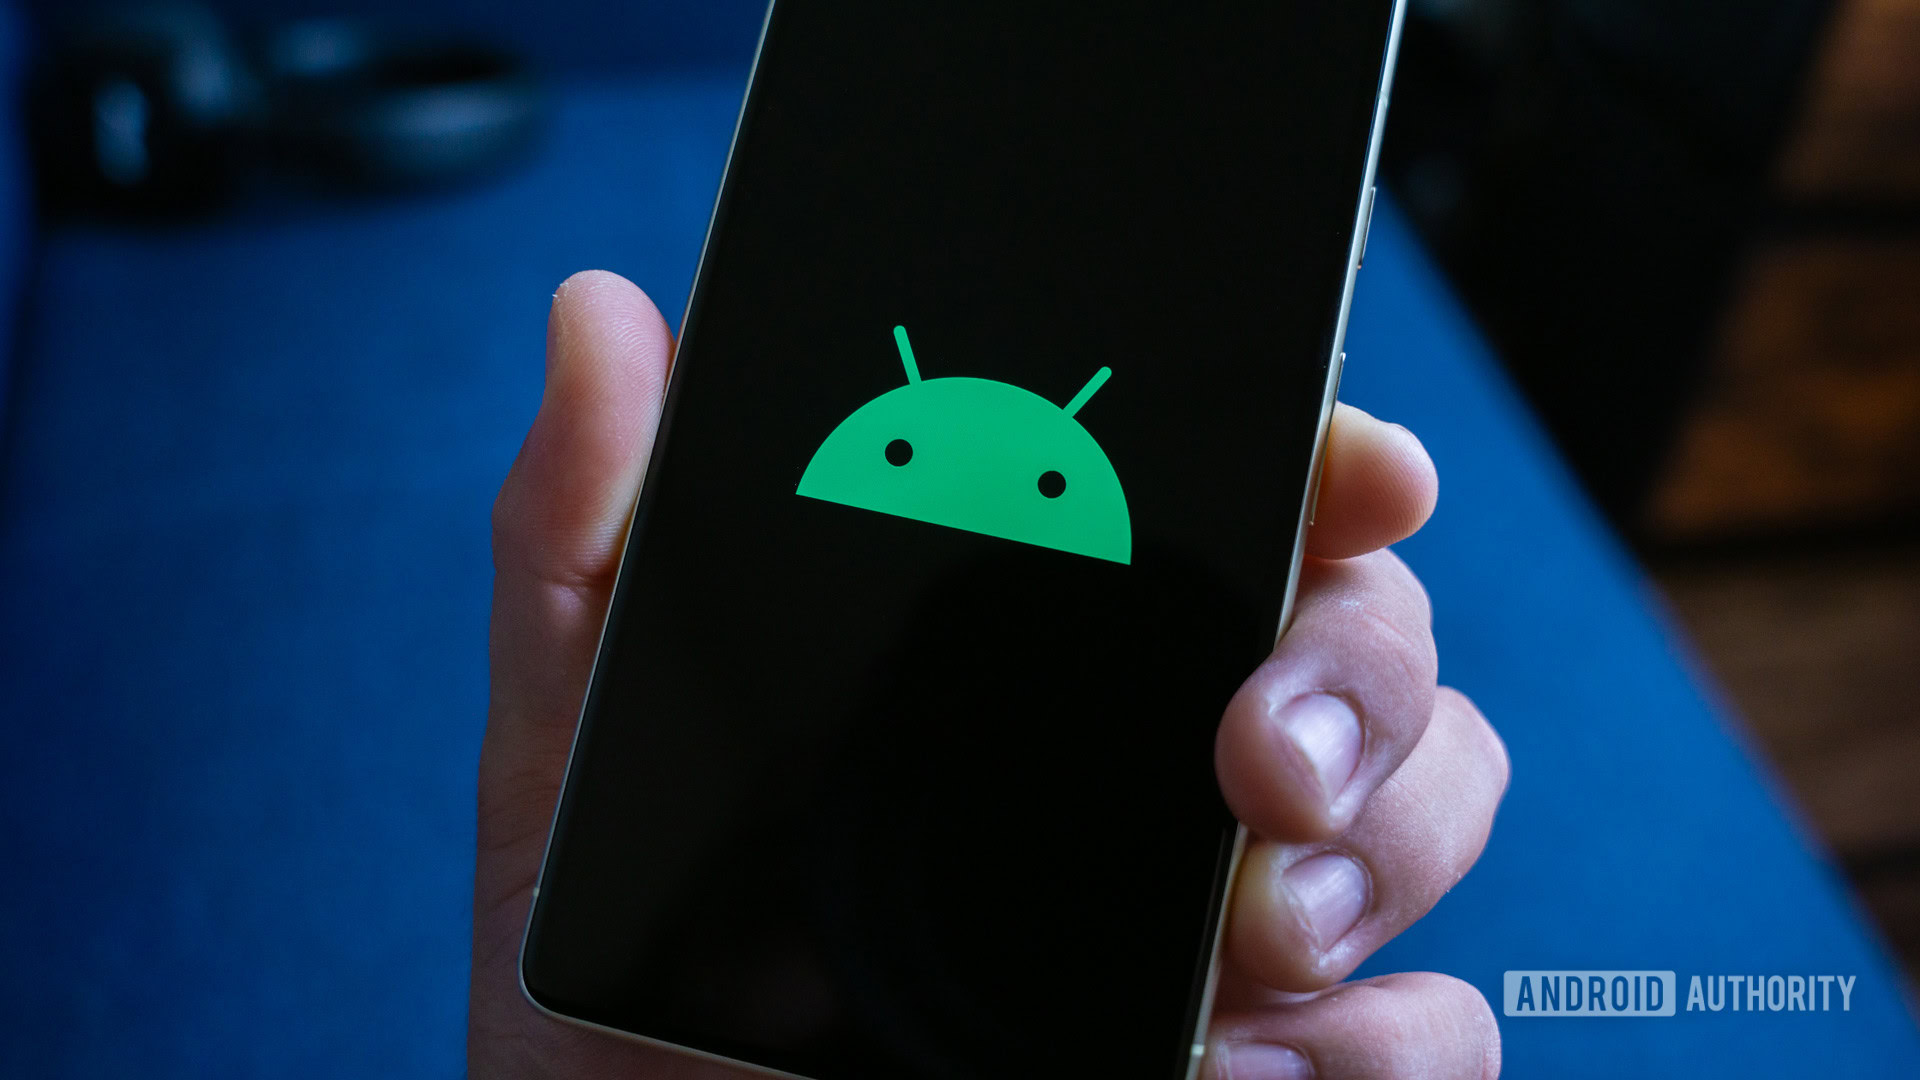 RISC-V support in Android just got a big setback